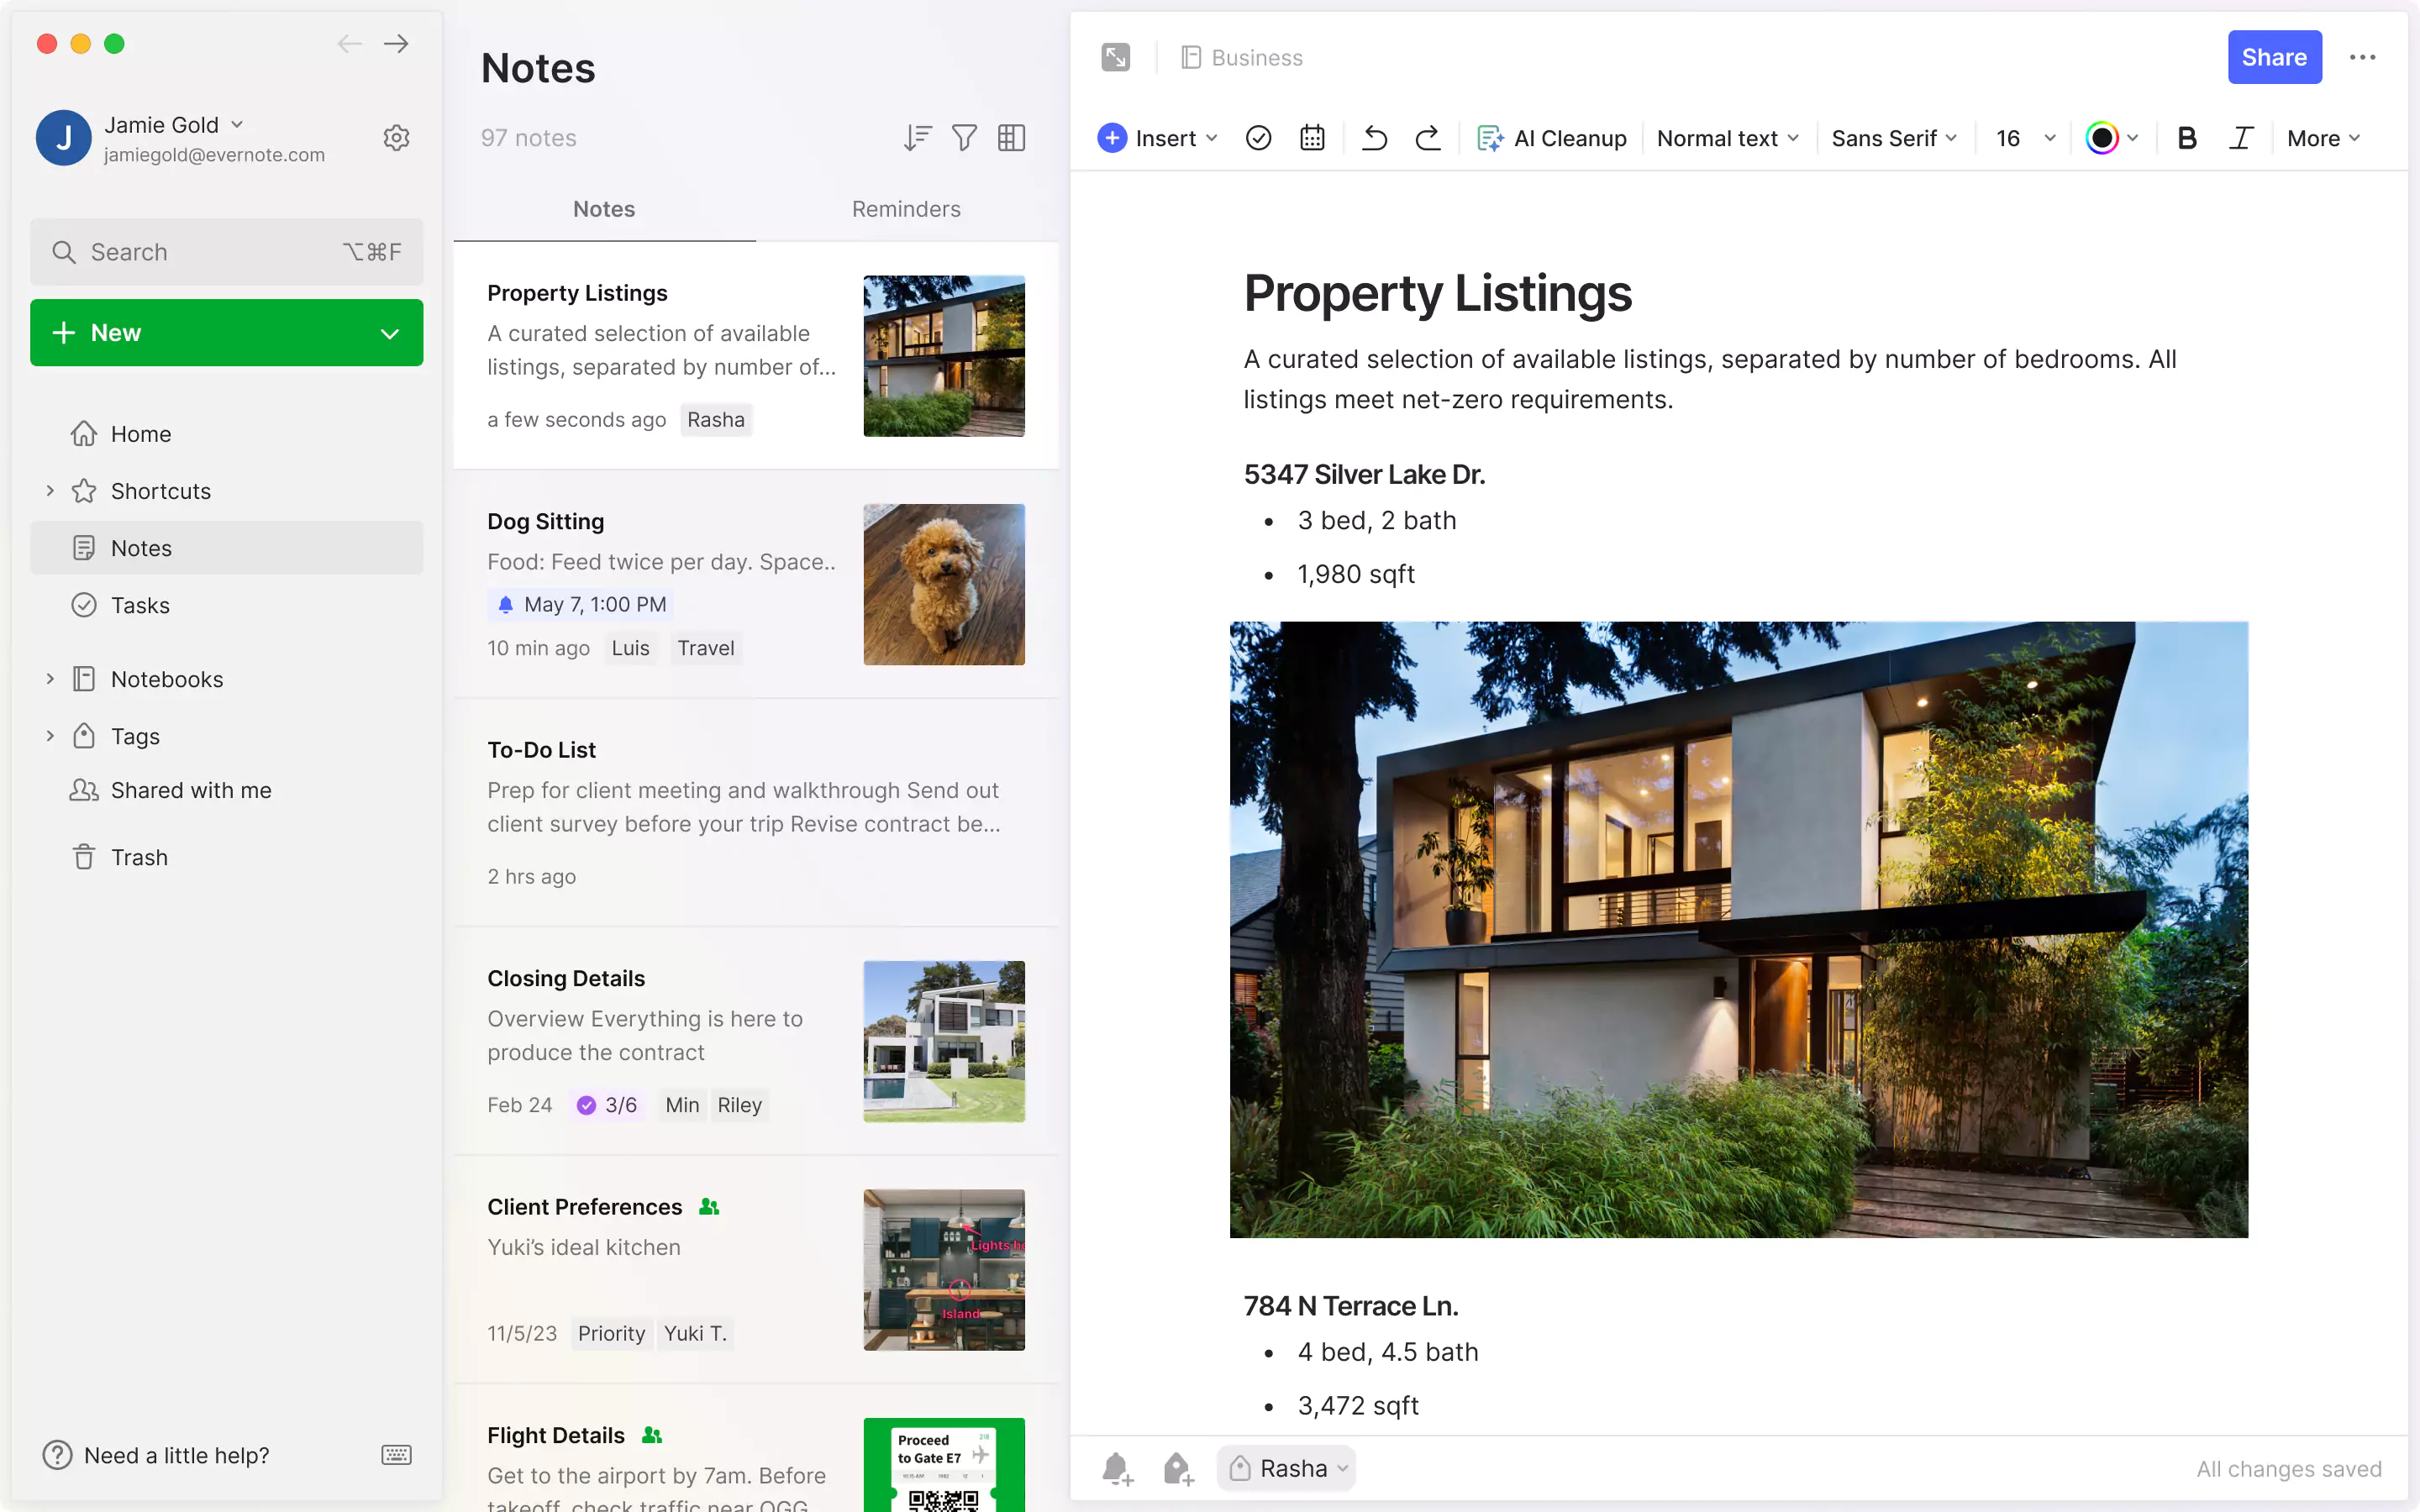 New Evernote UI - Notes List